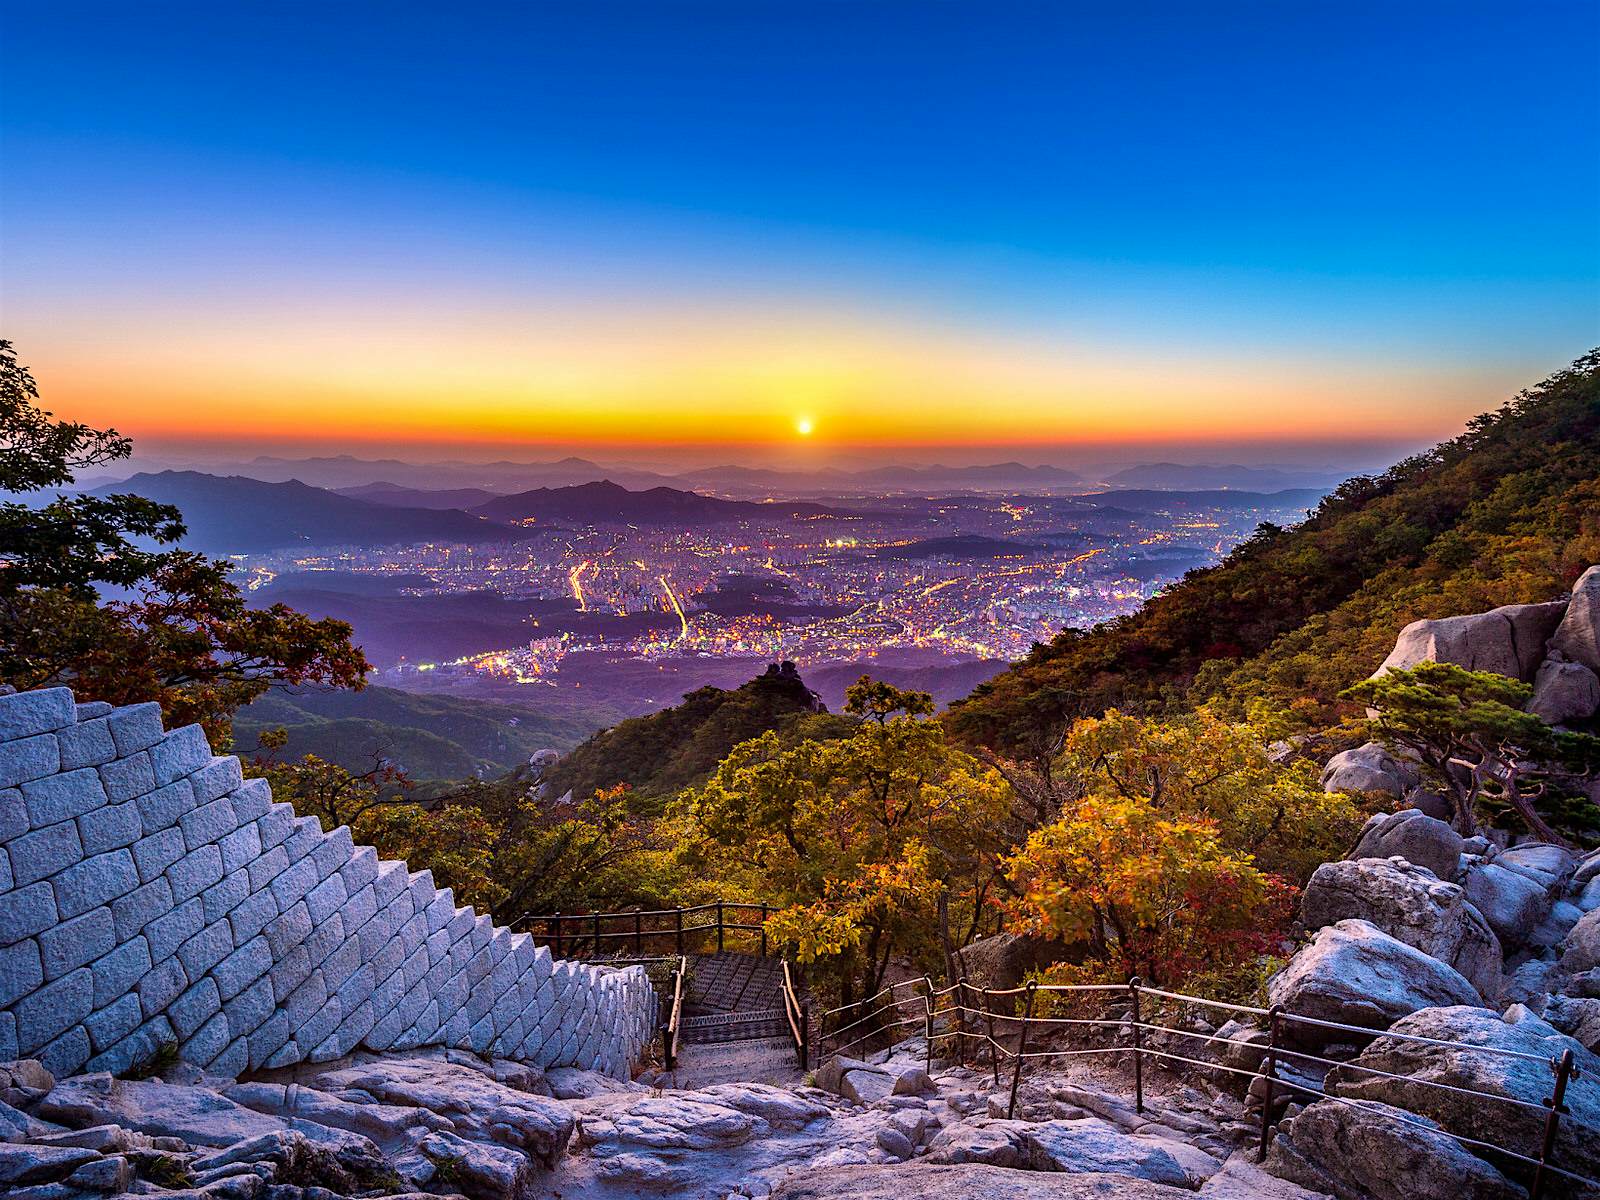 30 free things to do in Seoul - Lonely Planet